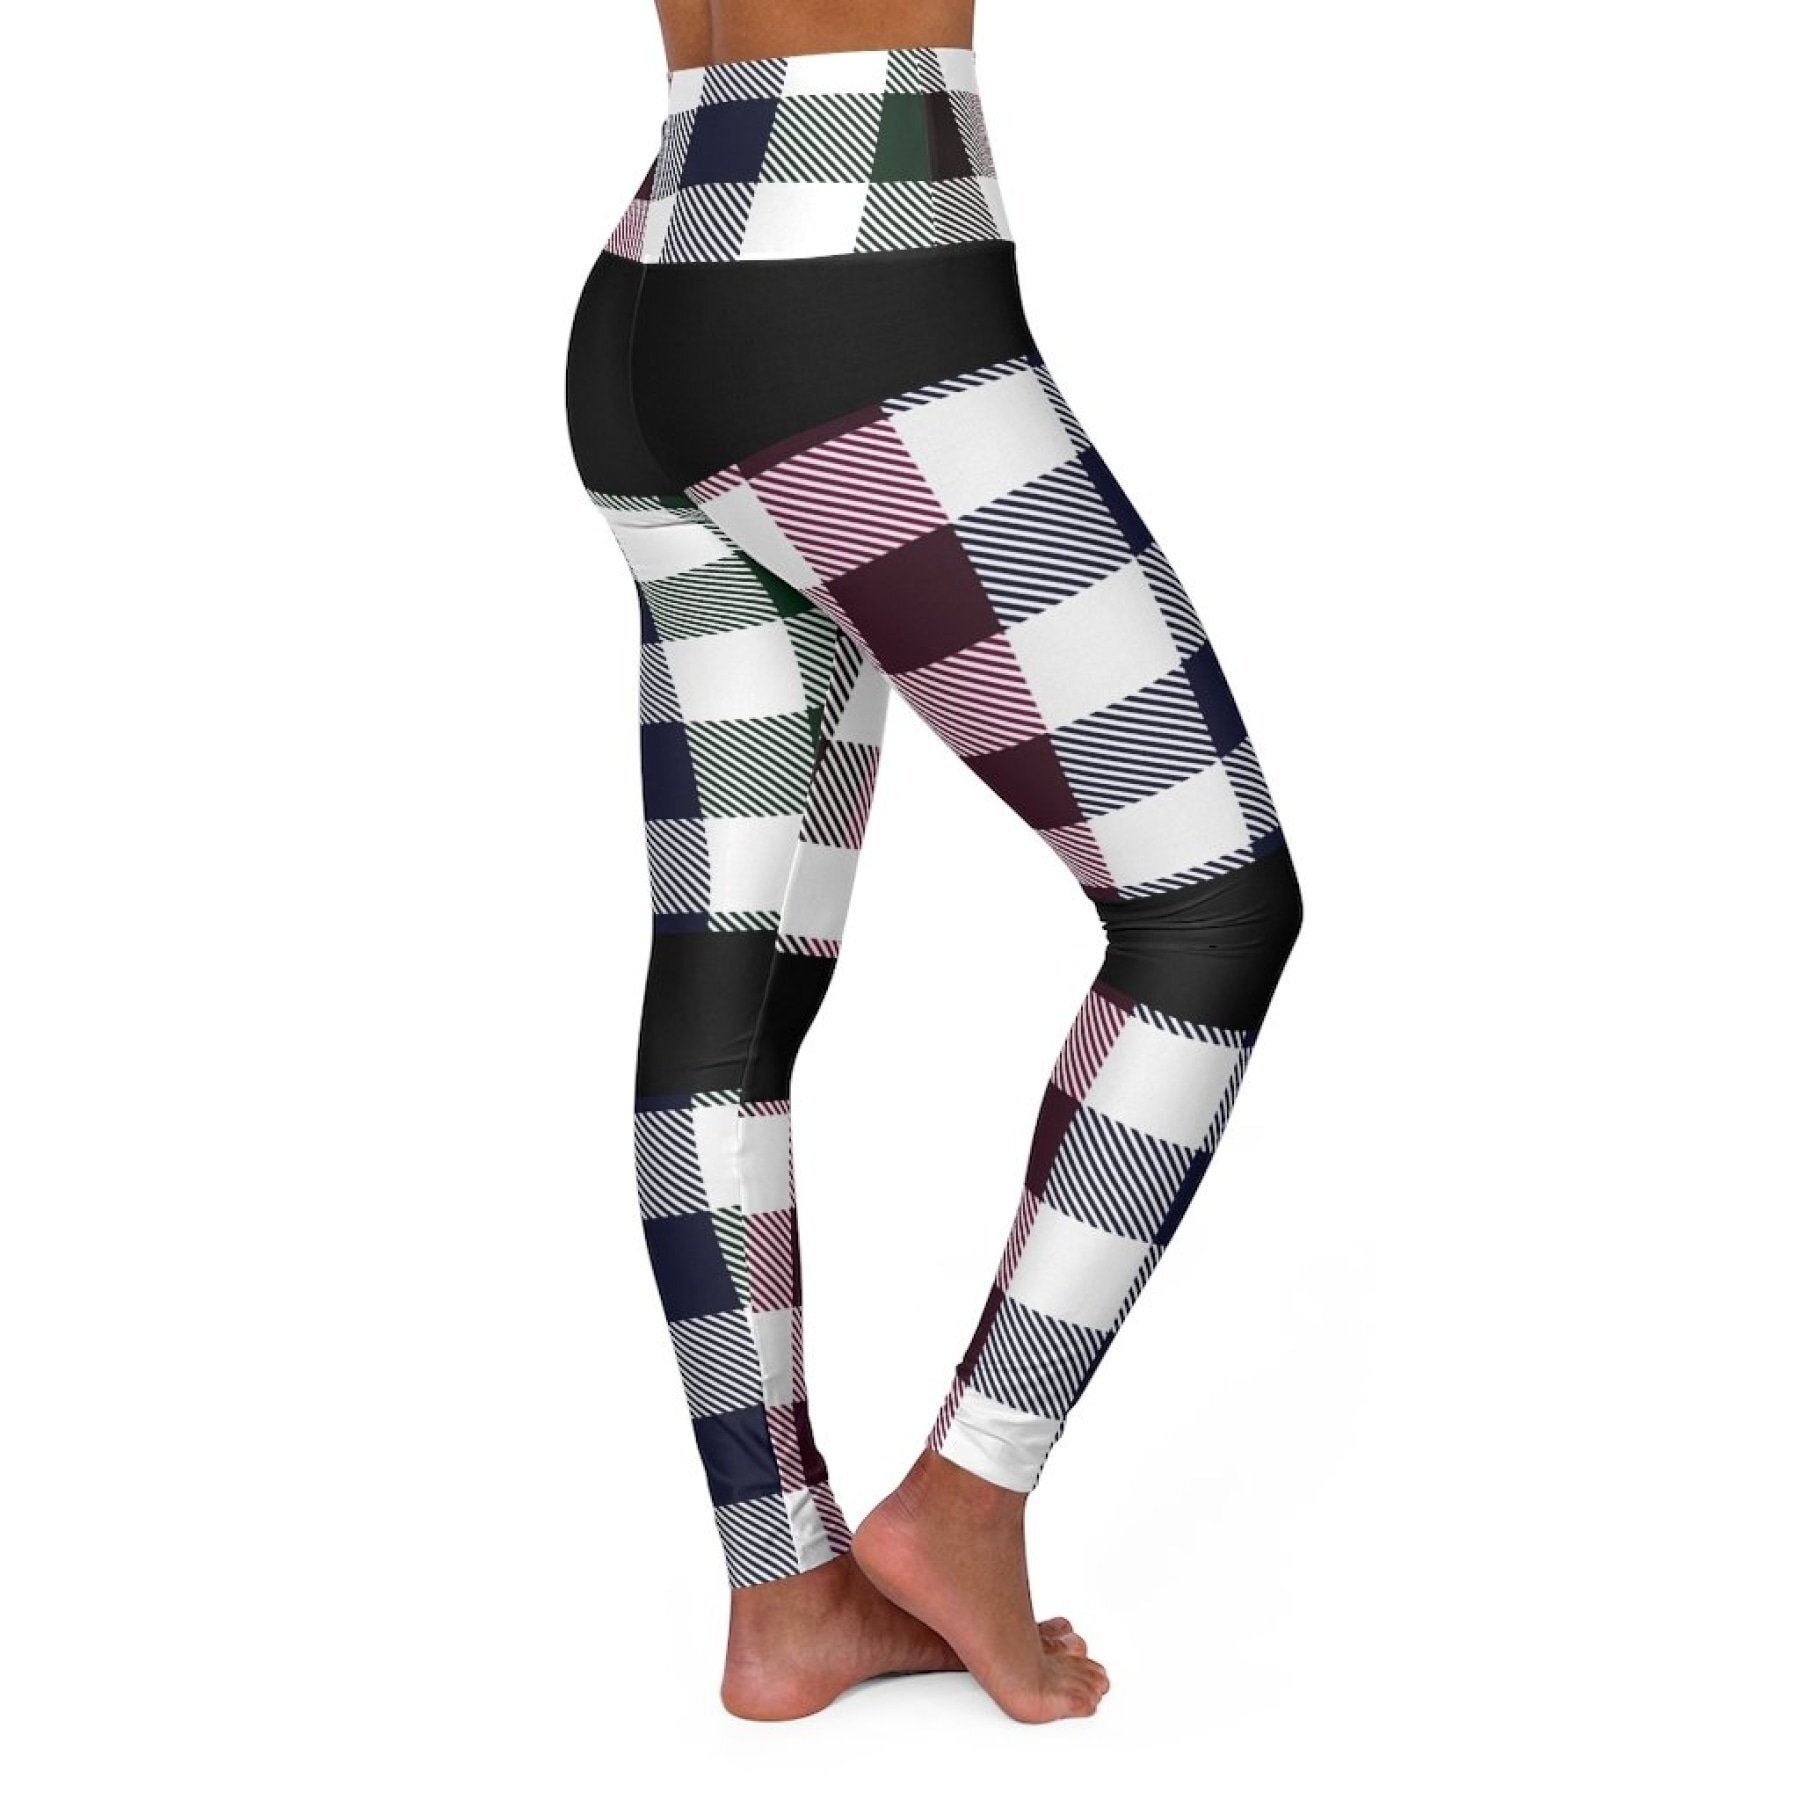 Womens Athletic Pants, Black And White Plaid Style High Waist Yoga Leggings  - Youarrived